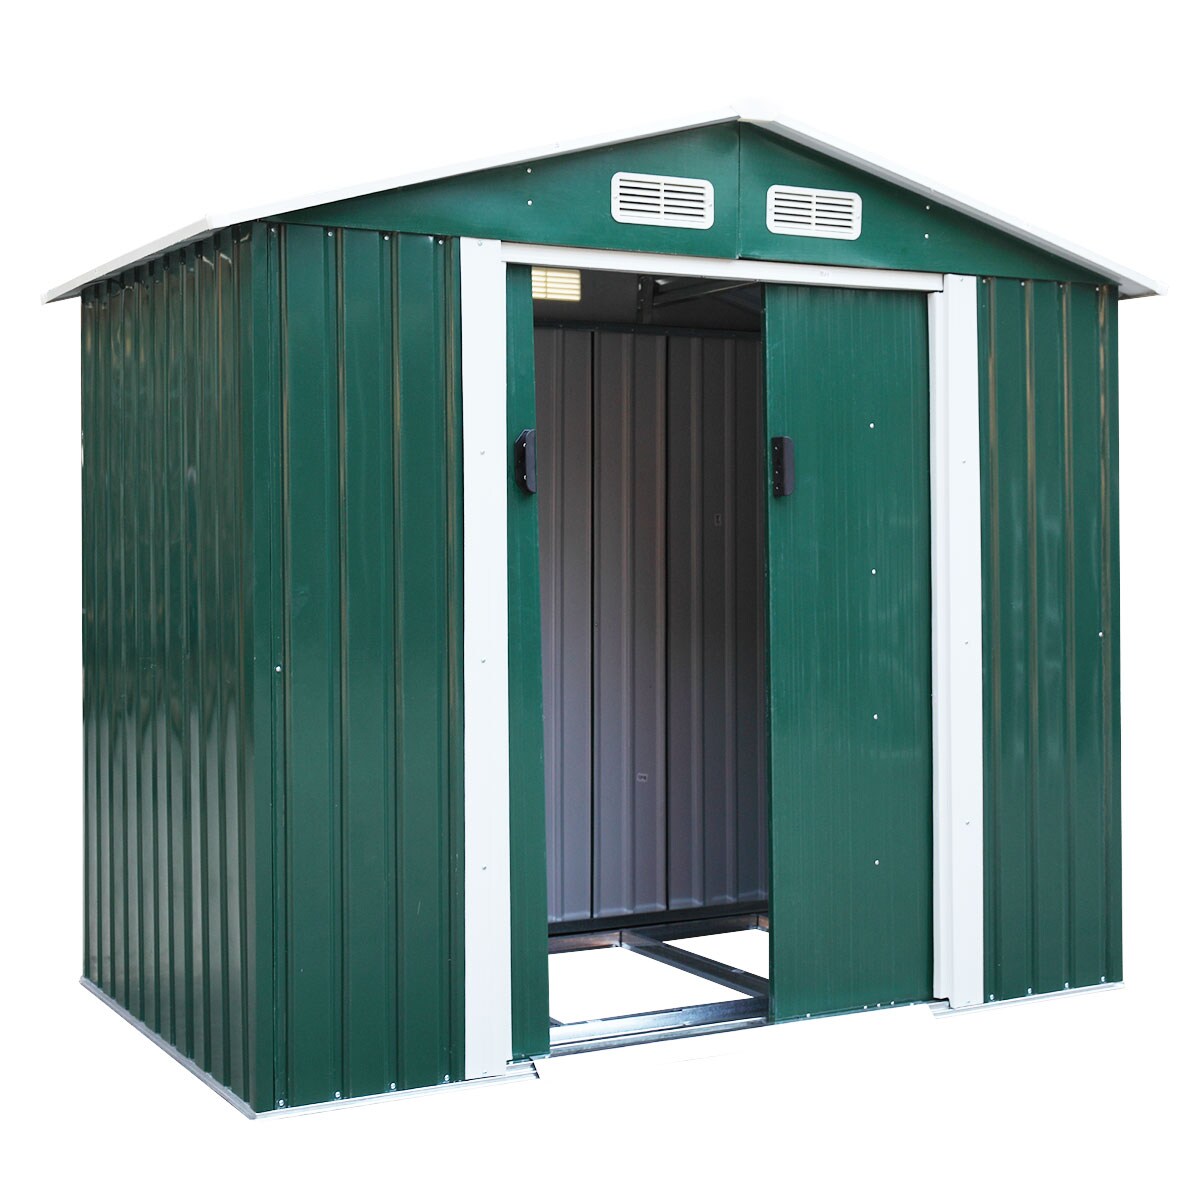 Galvanized Steel Shed with Lockable Sliding Door 4 Vents Deep Gray HOGYME 7' x 4.2' Outdoor Storage Shed with Stable Base 